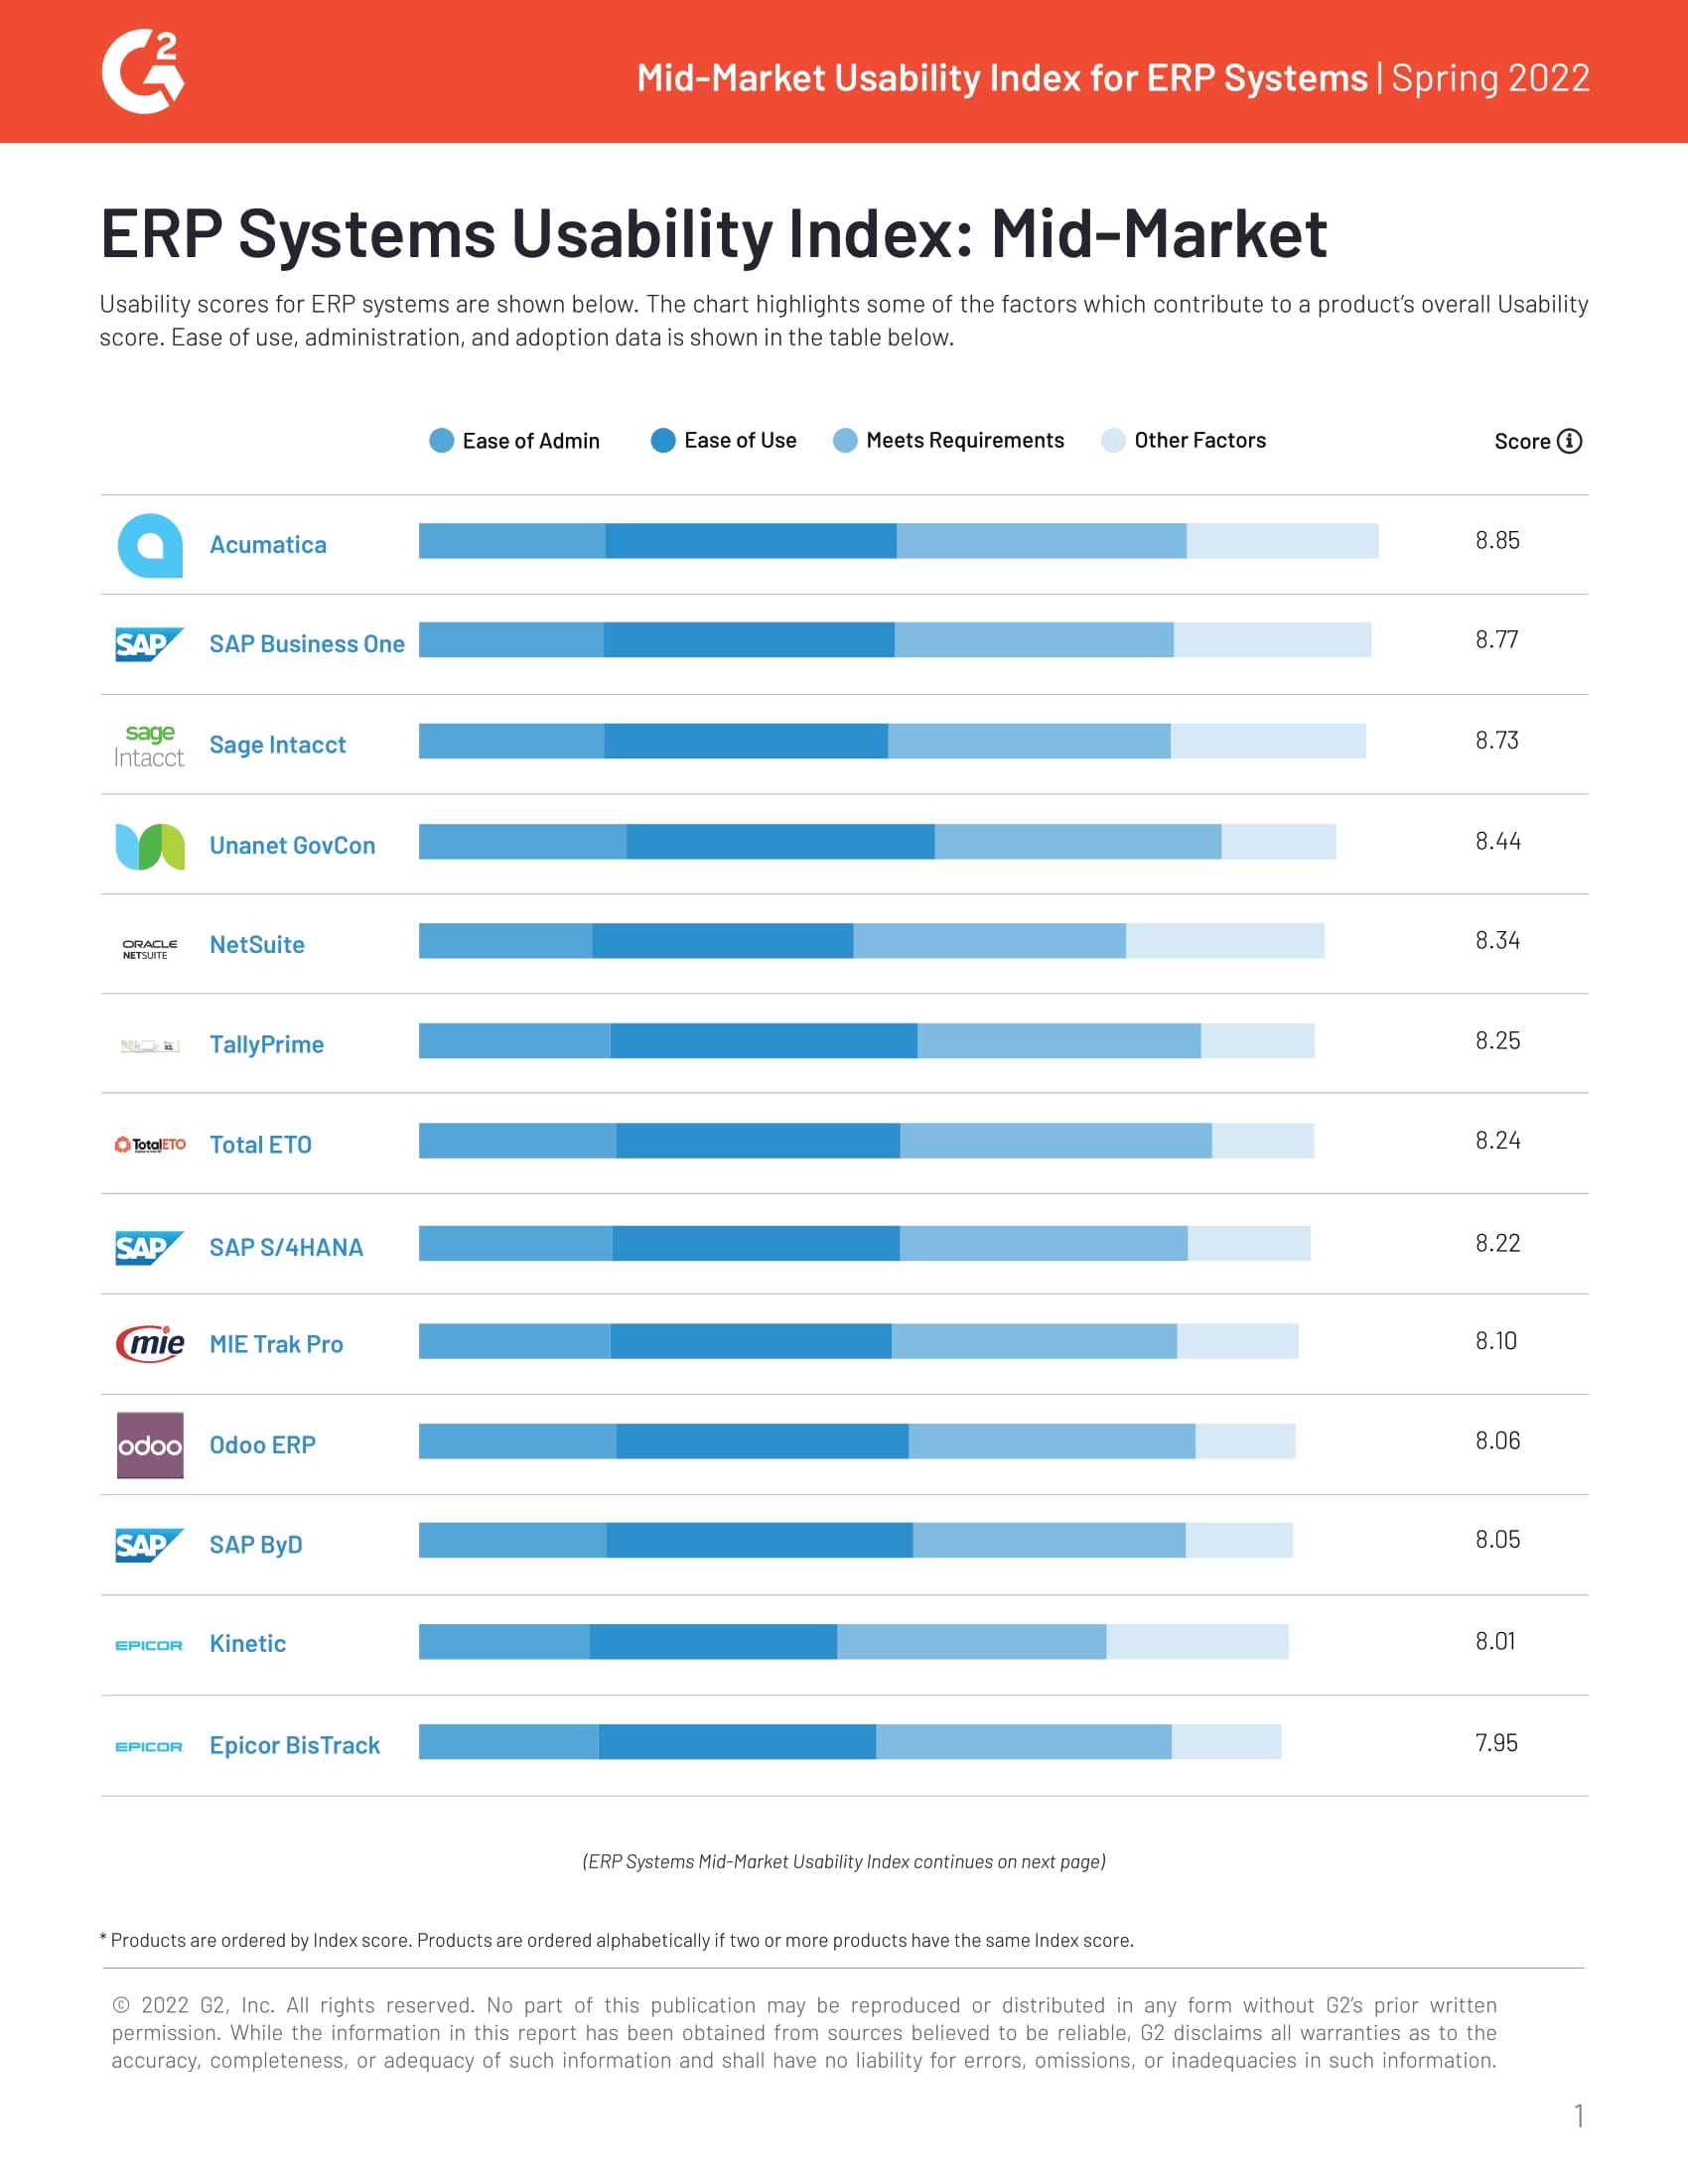 Overall Usability: G2 Reviews Acumatica and 32 Other Mid-Market ERP Systems 